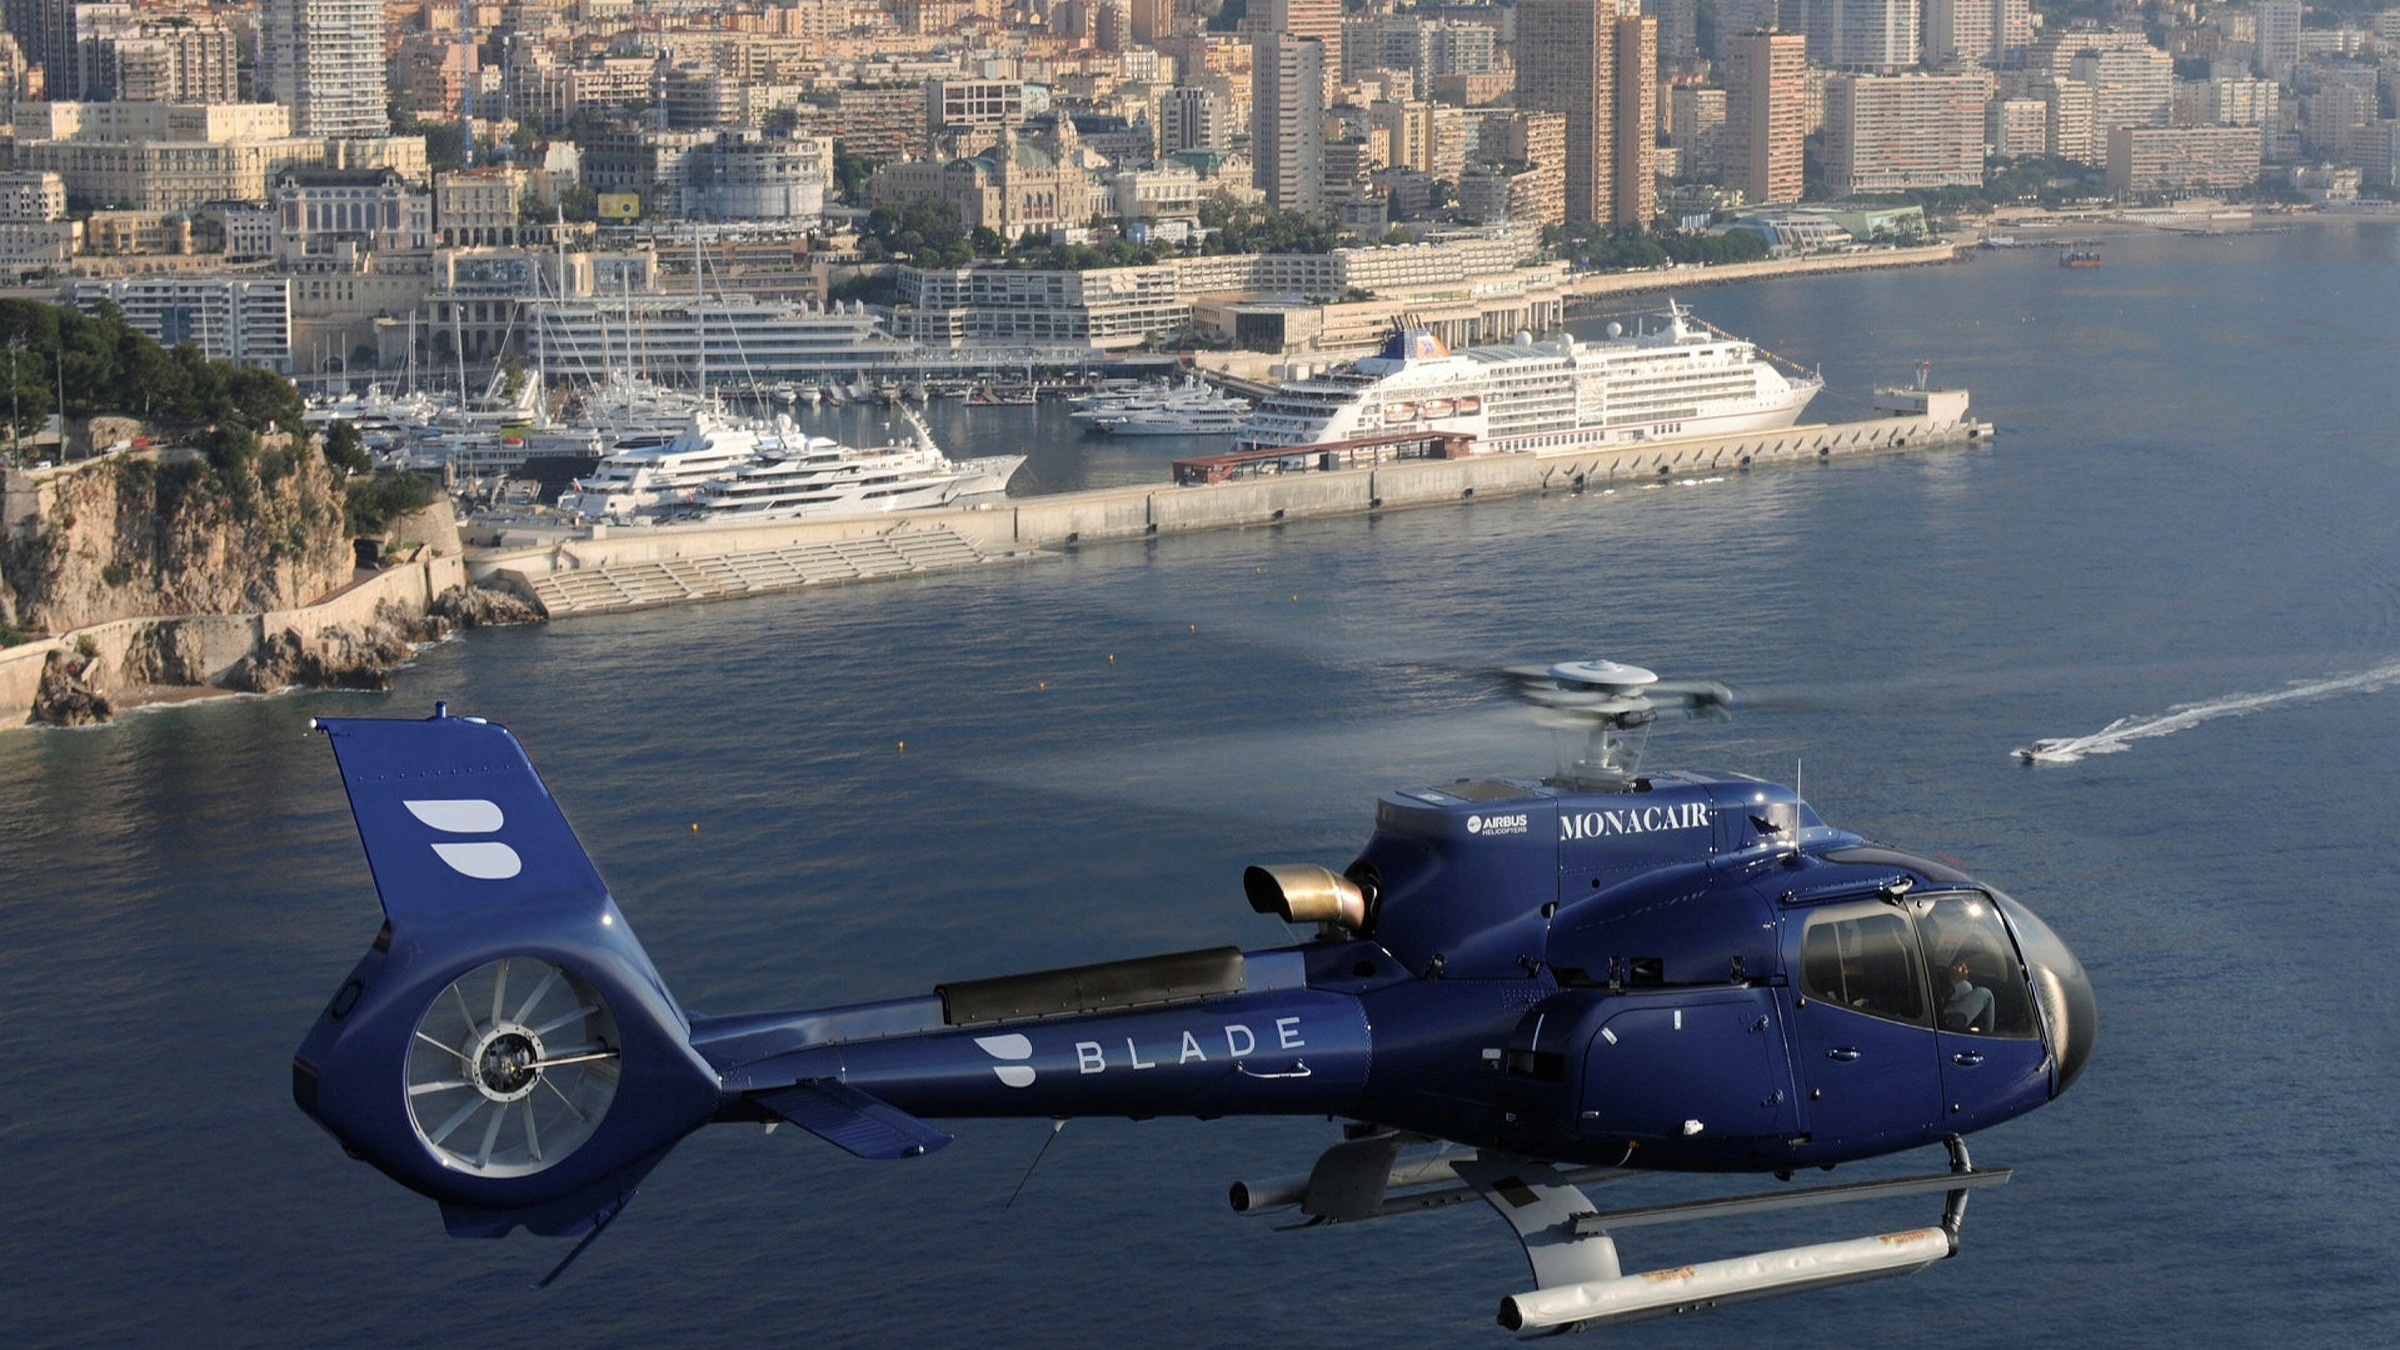 Shuttle company Blade Air Mobility swoops on luxe Riviera helicopter routes | Financial Times 2400x1350